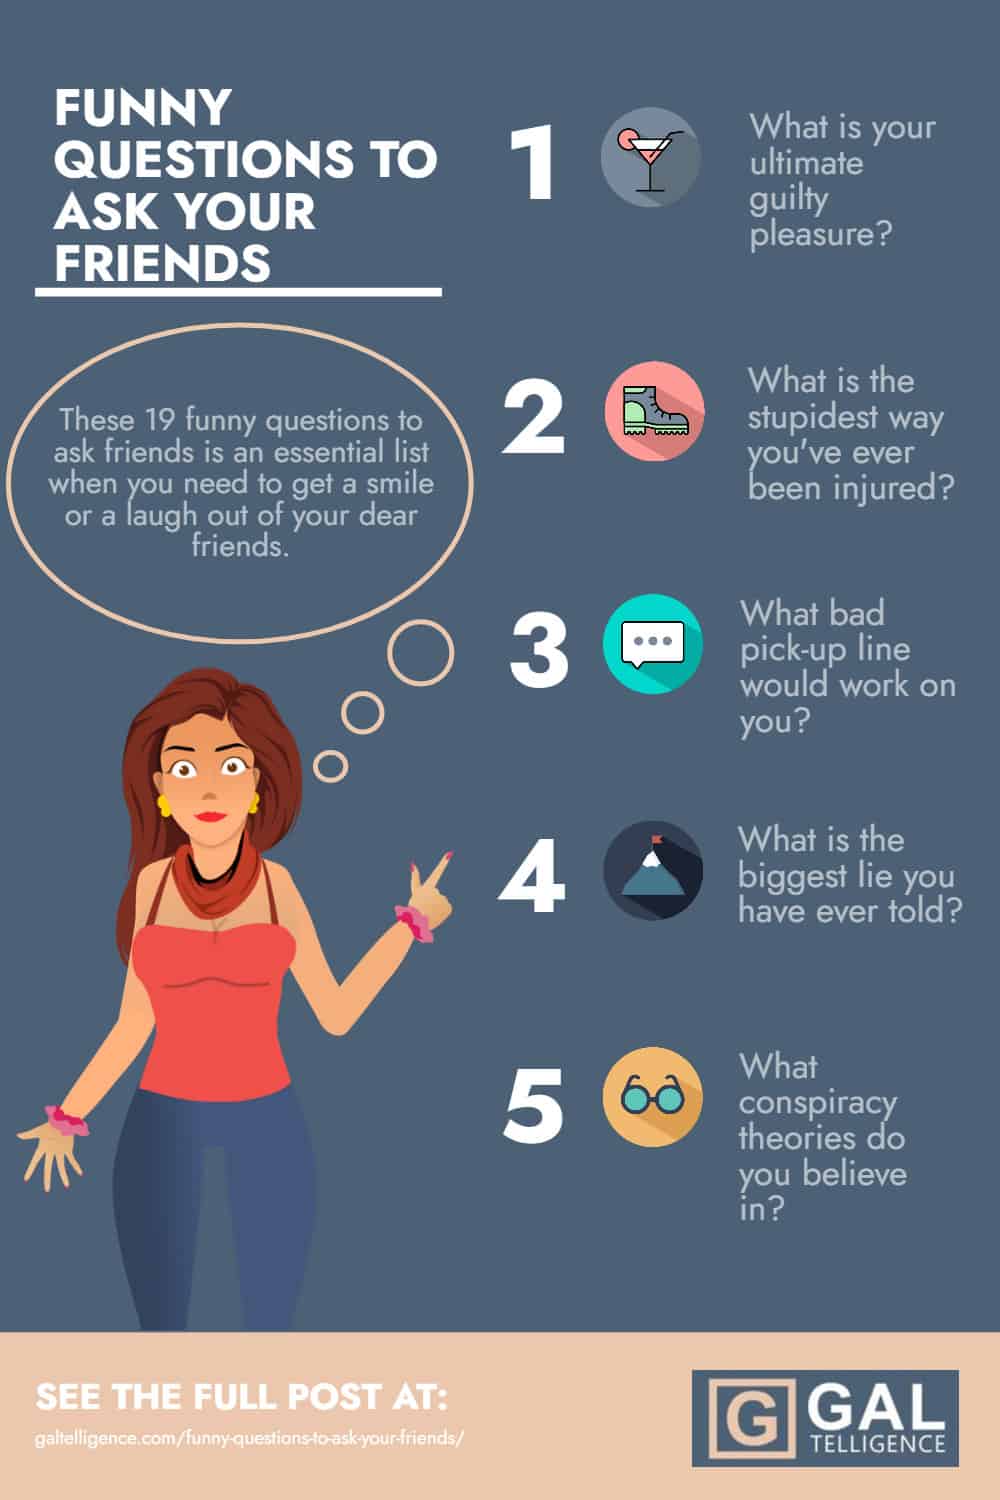 Funny Questions to Ask Your Friends - Infographic